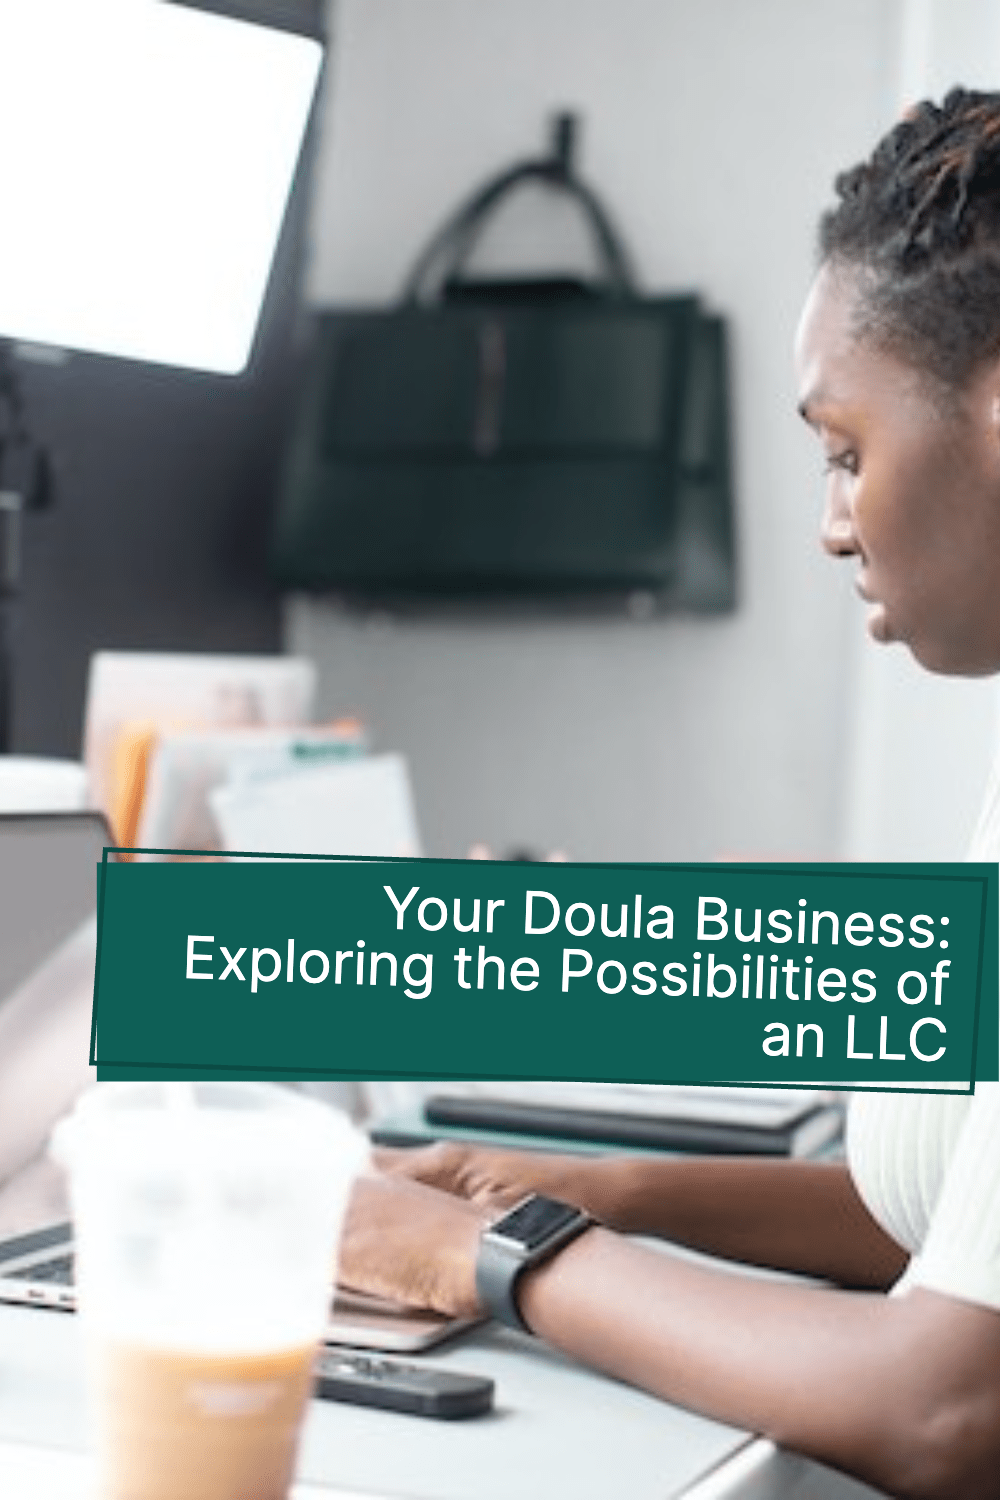 Exploring LLC possibilities for Your Doula Business.